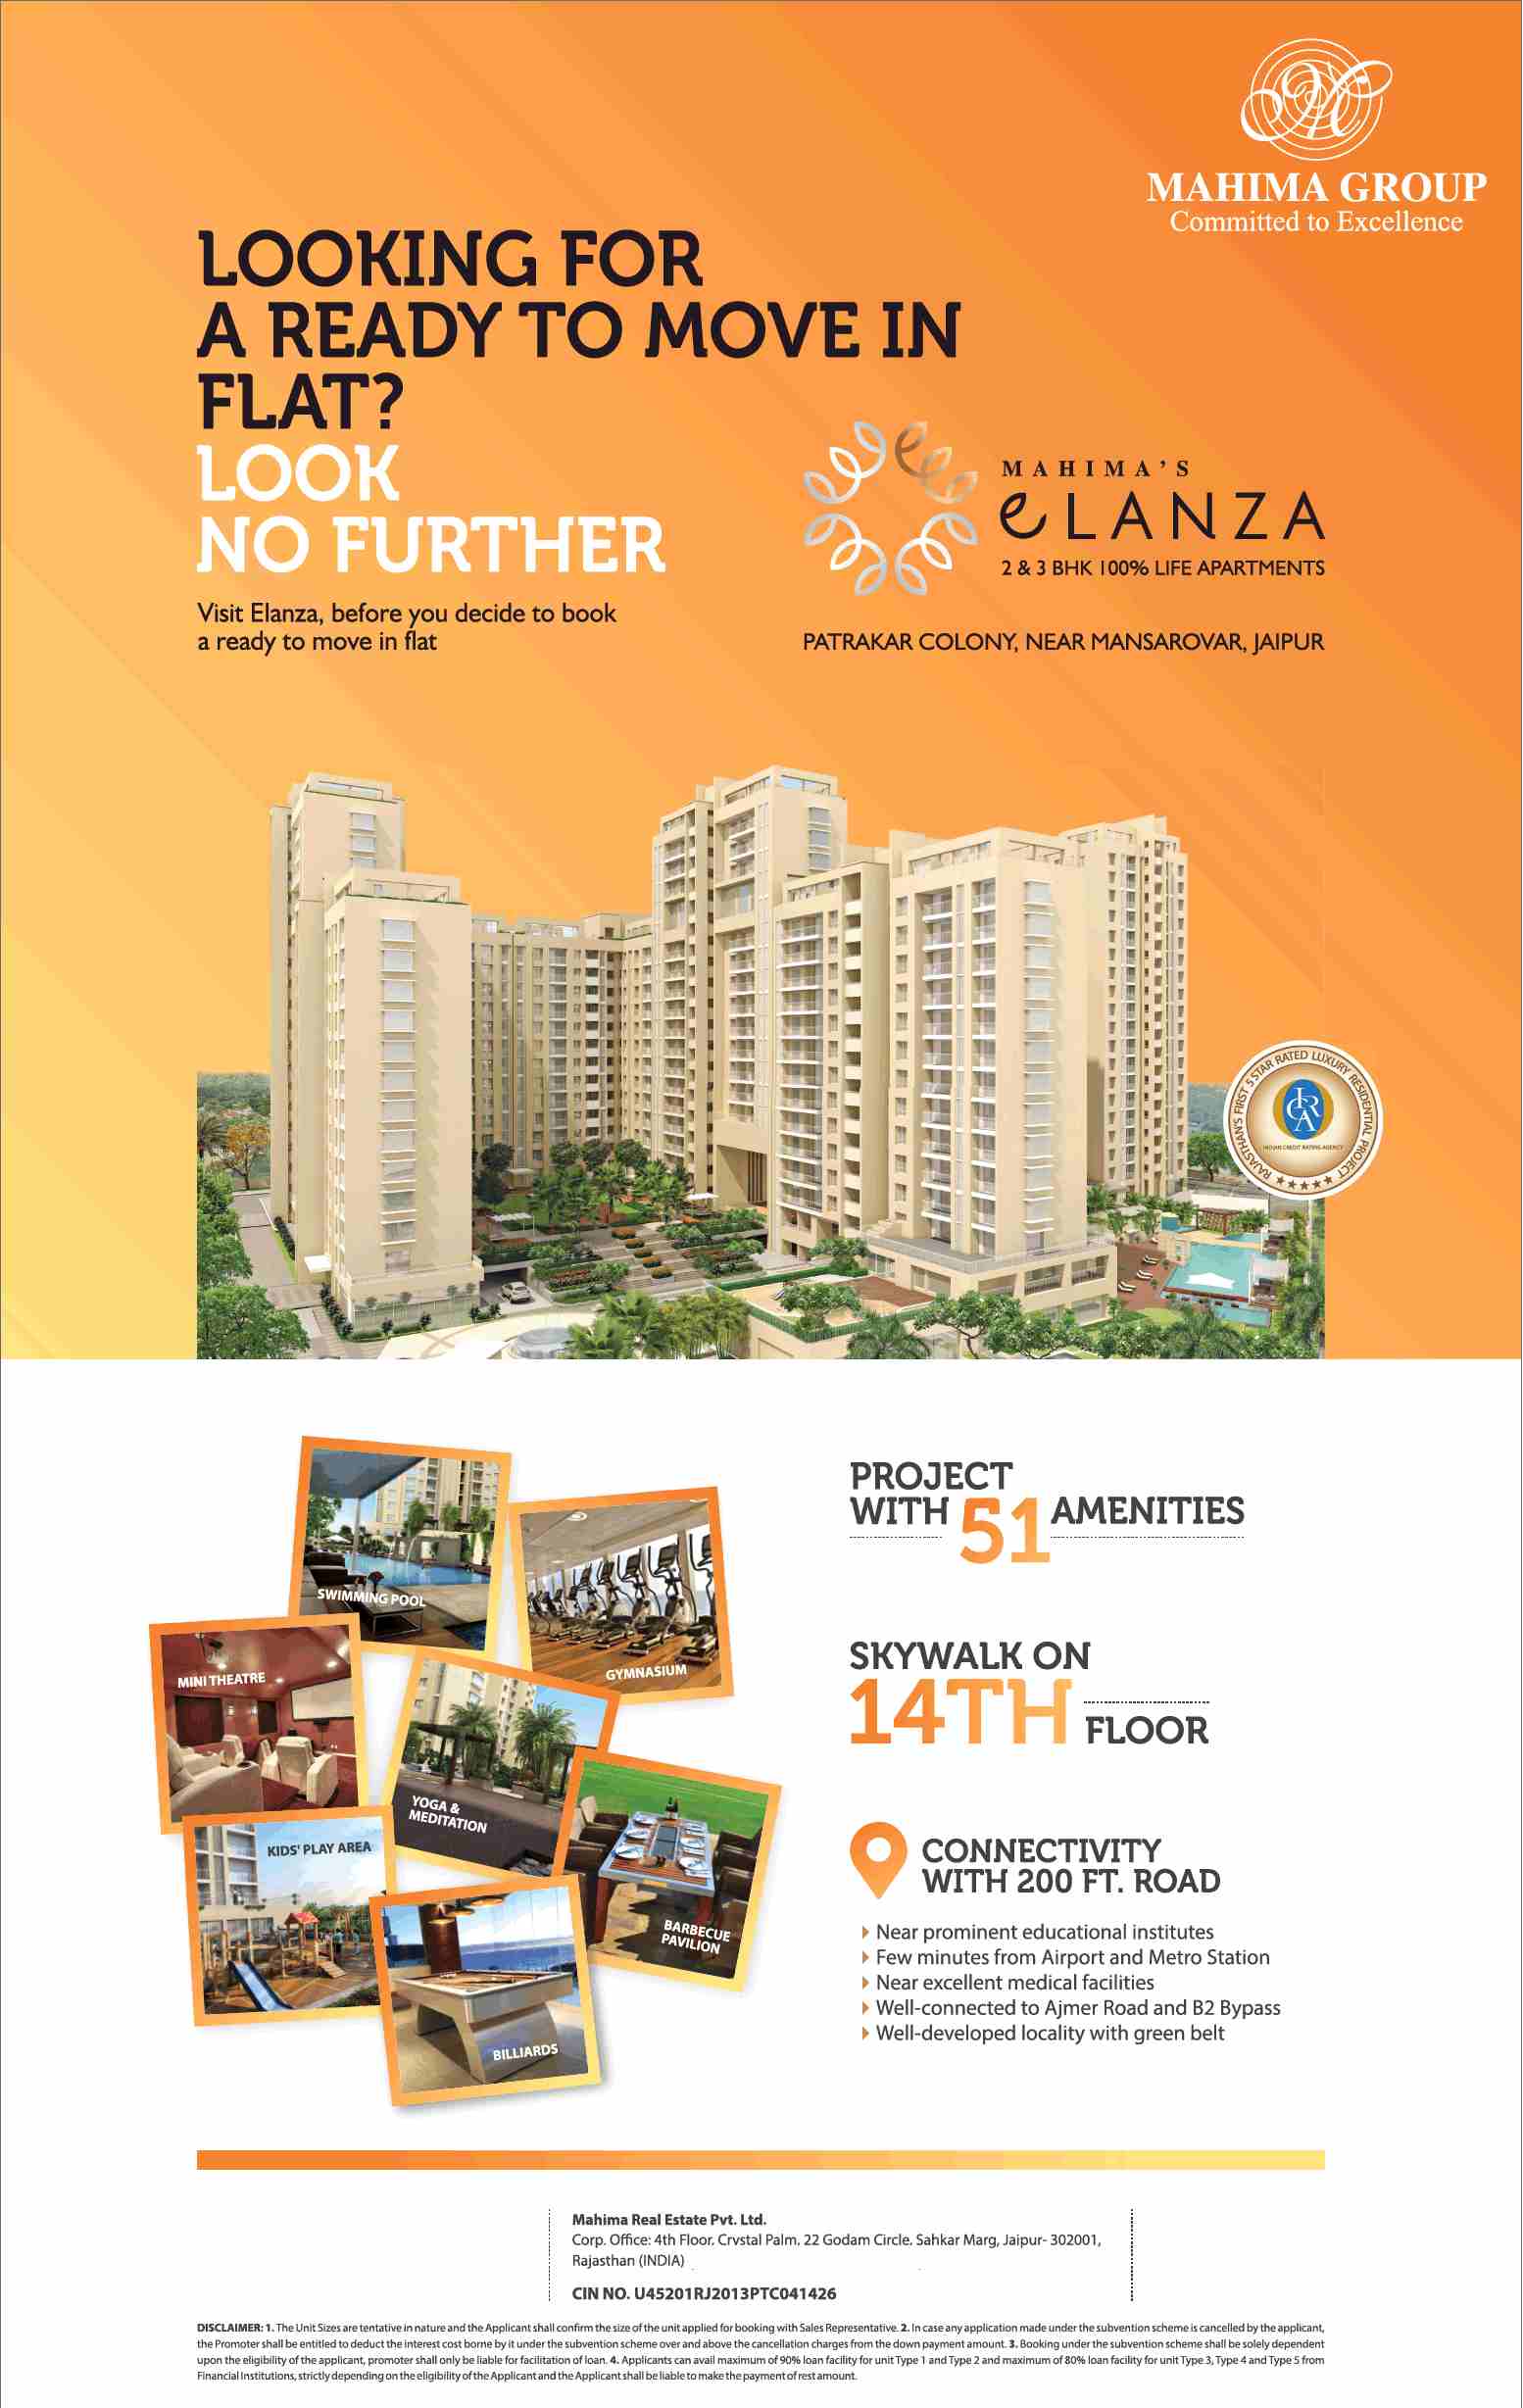 Book ready to move home with great amenities at Mahima Elanza in Jaipur